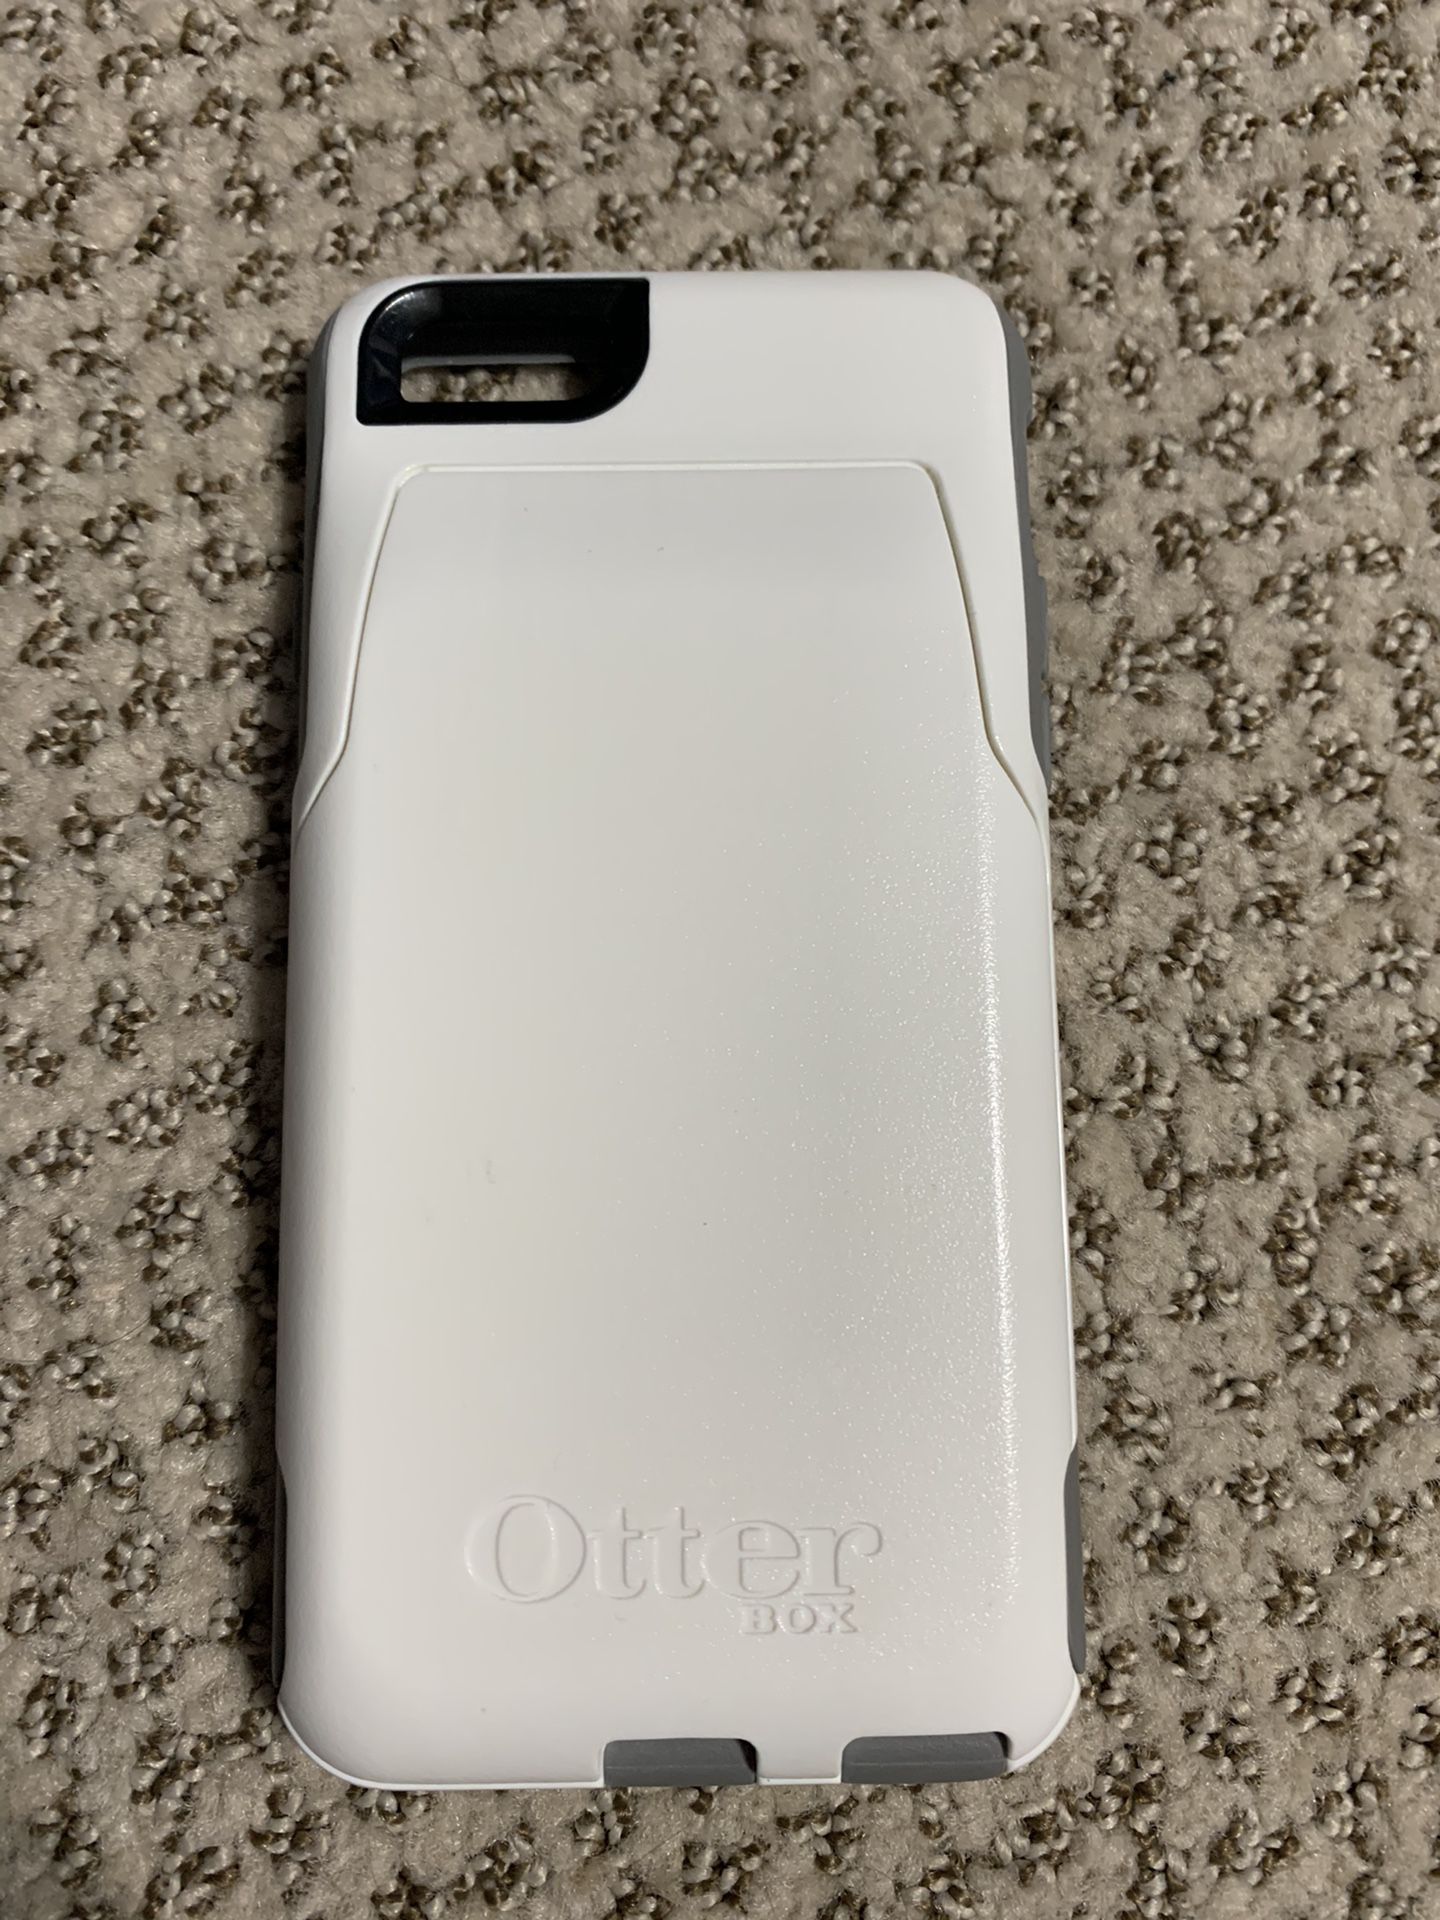 Otter Box iPhone 6/6S Wallet Case